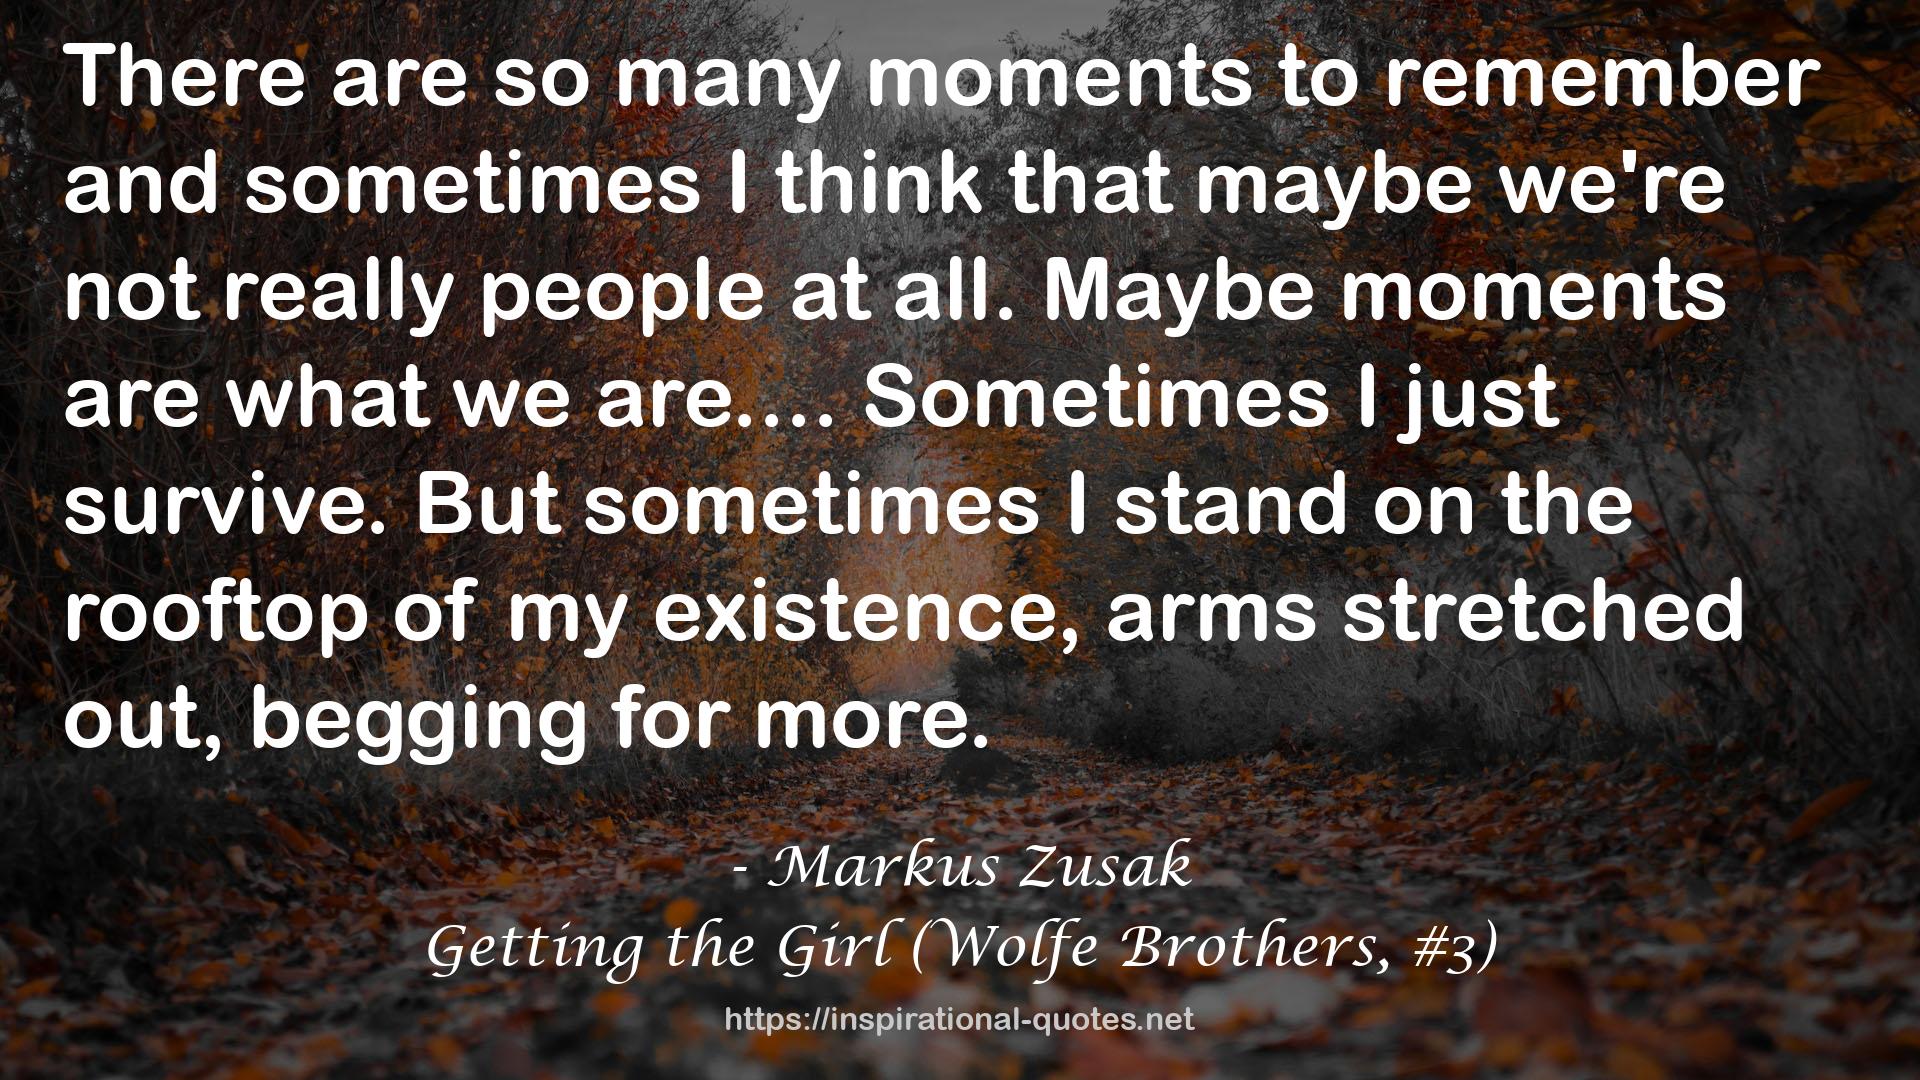 Getting the Girl (Wolfe Brothers, #3) QUOTES